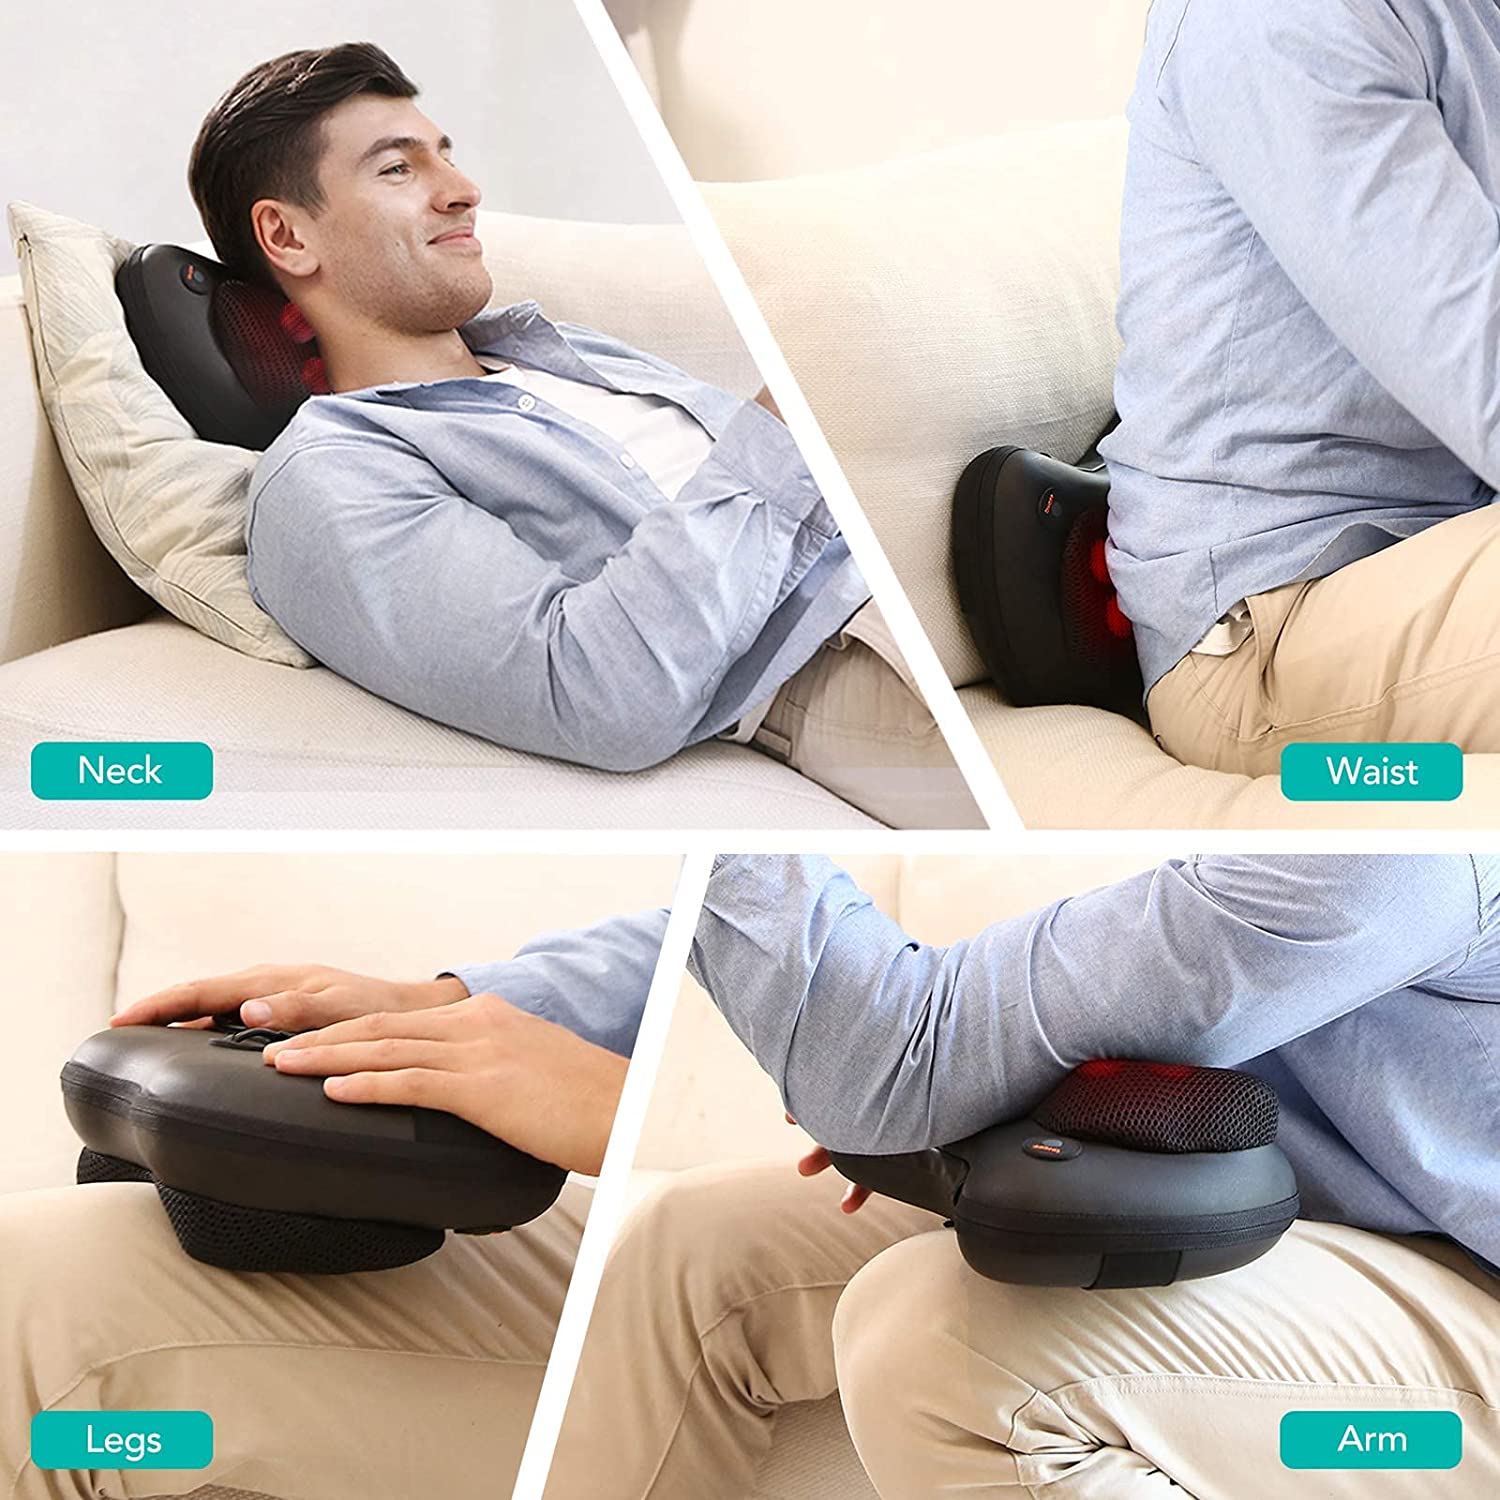 Massager with Heat,Shiatsu Back and Neck Massager with Deep Tissue  Kneading,Electric Back Massage Pillow for Back,Neck,Shoulders,Legs,Foot,Body  Muscle Pain Relief,Use at Home,Car,Office